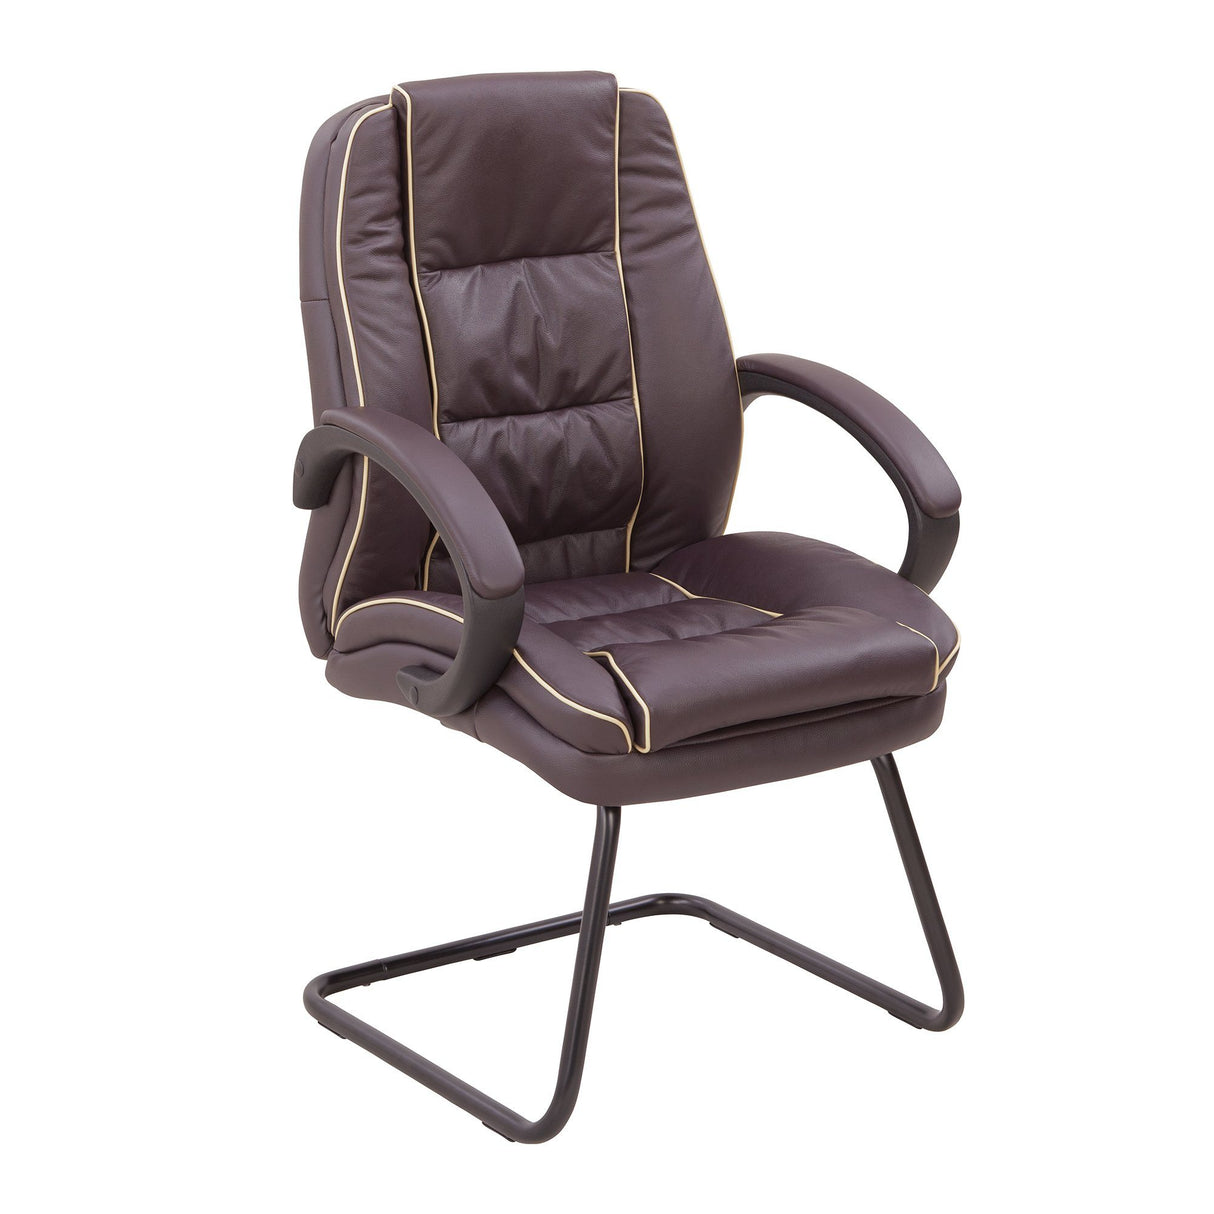 Nautilus Designs Truro Cantilever Framed Leather Faced visitor Armchair with Contrasting Piping - Burgundy